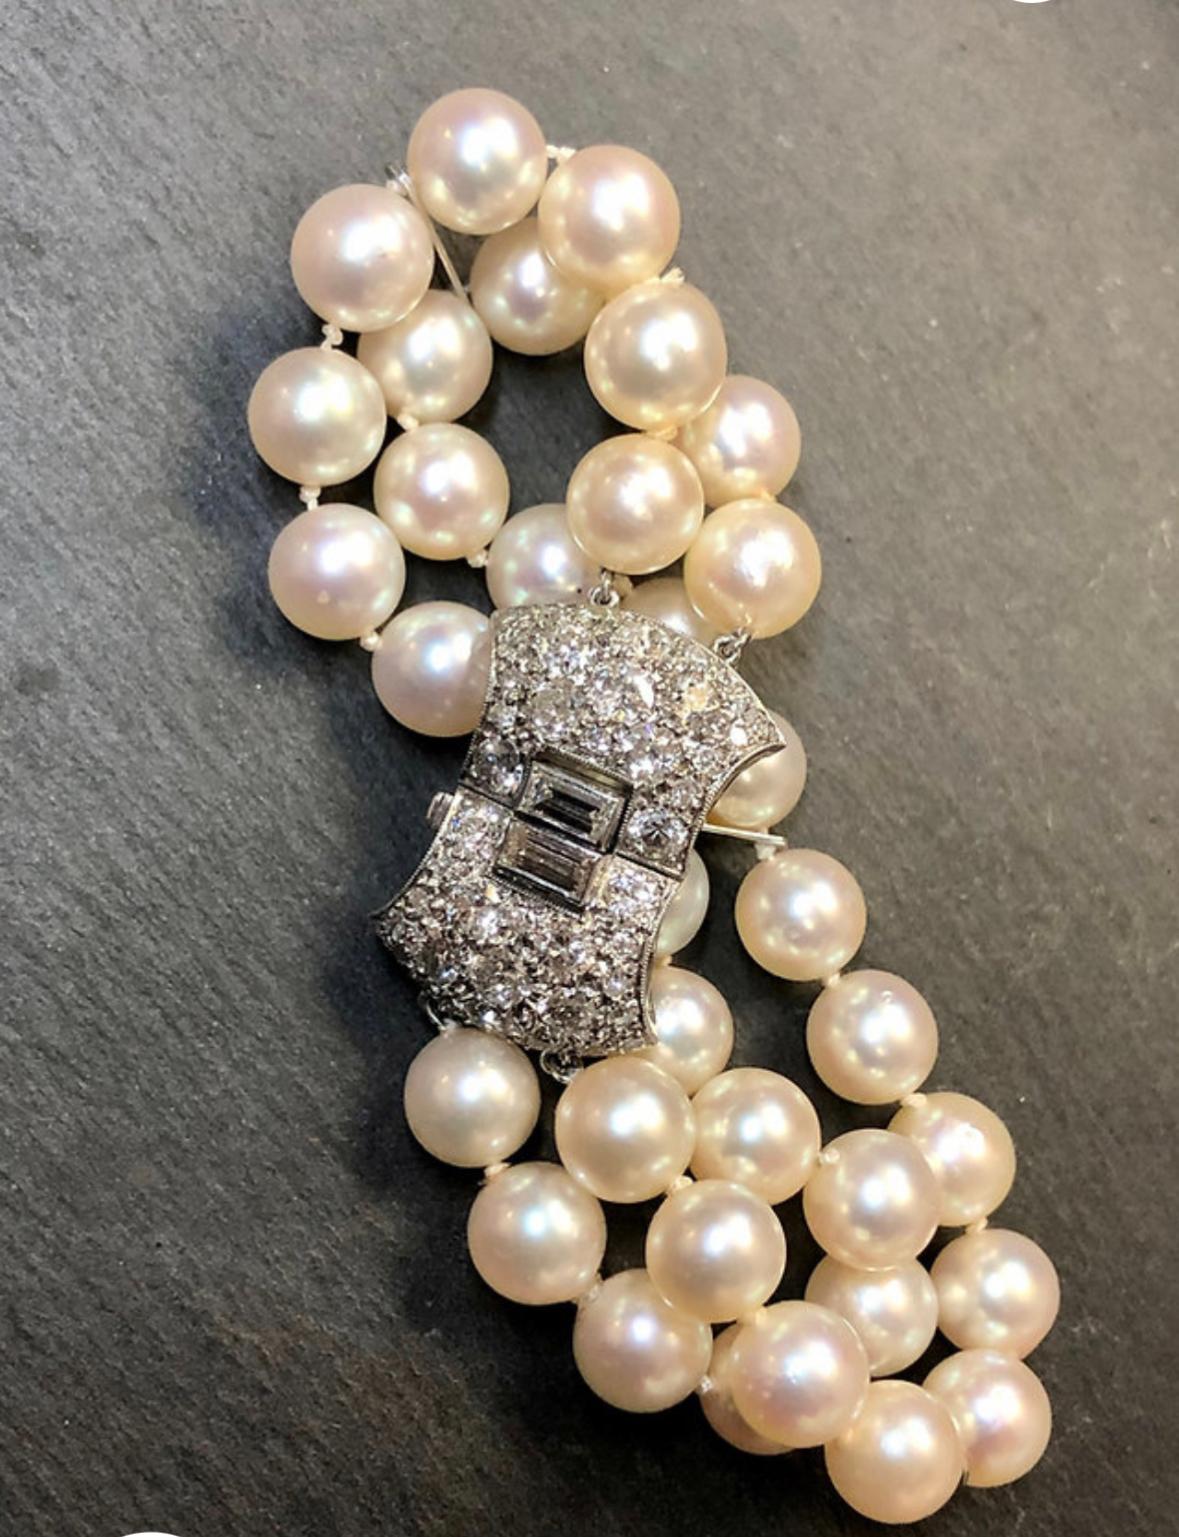 An original Art Deco period bracelet done in platinum and set with approximately 2.60cttw in H-J color Vs1-Si2 clarity old European cut diamonds attached to a double strand of 7mm cultured pearls with platinum separators.

Dimensions/Weight
6.50”